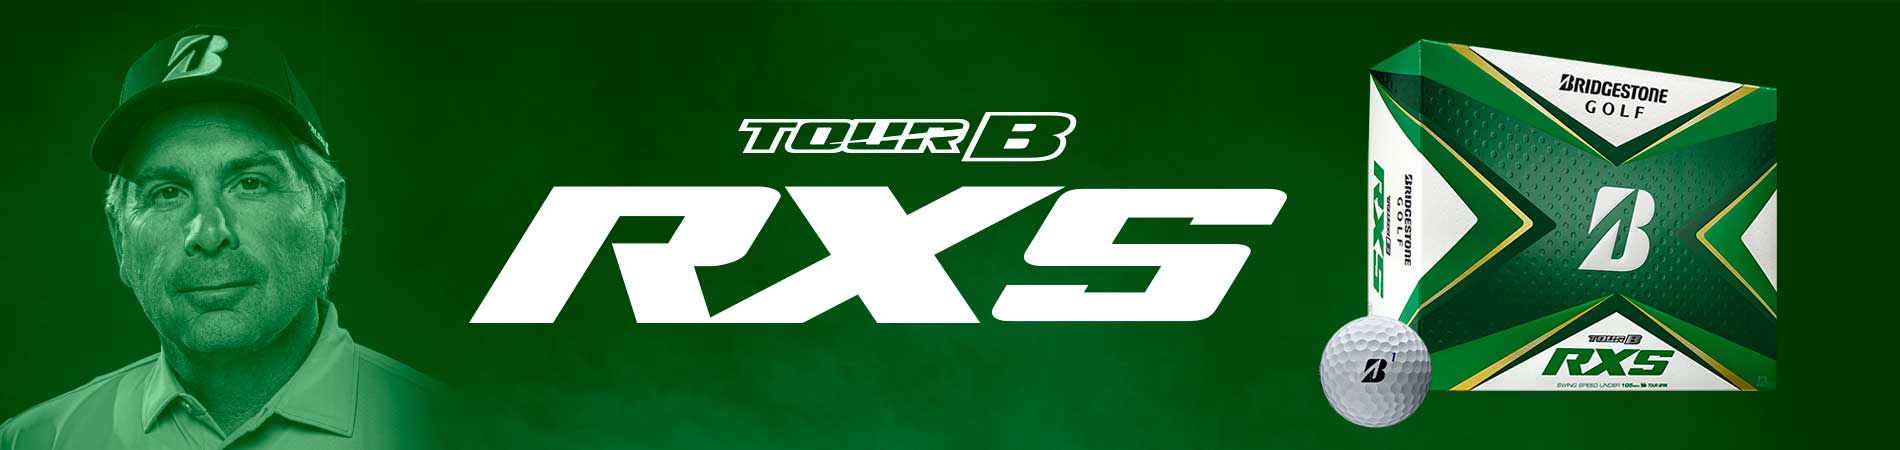 Fred Couples Tour B RXS